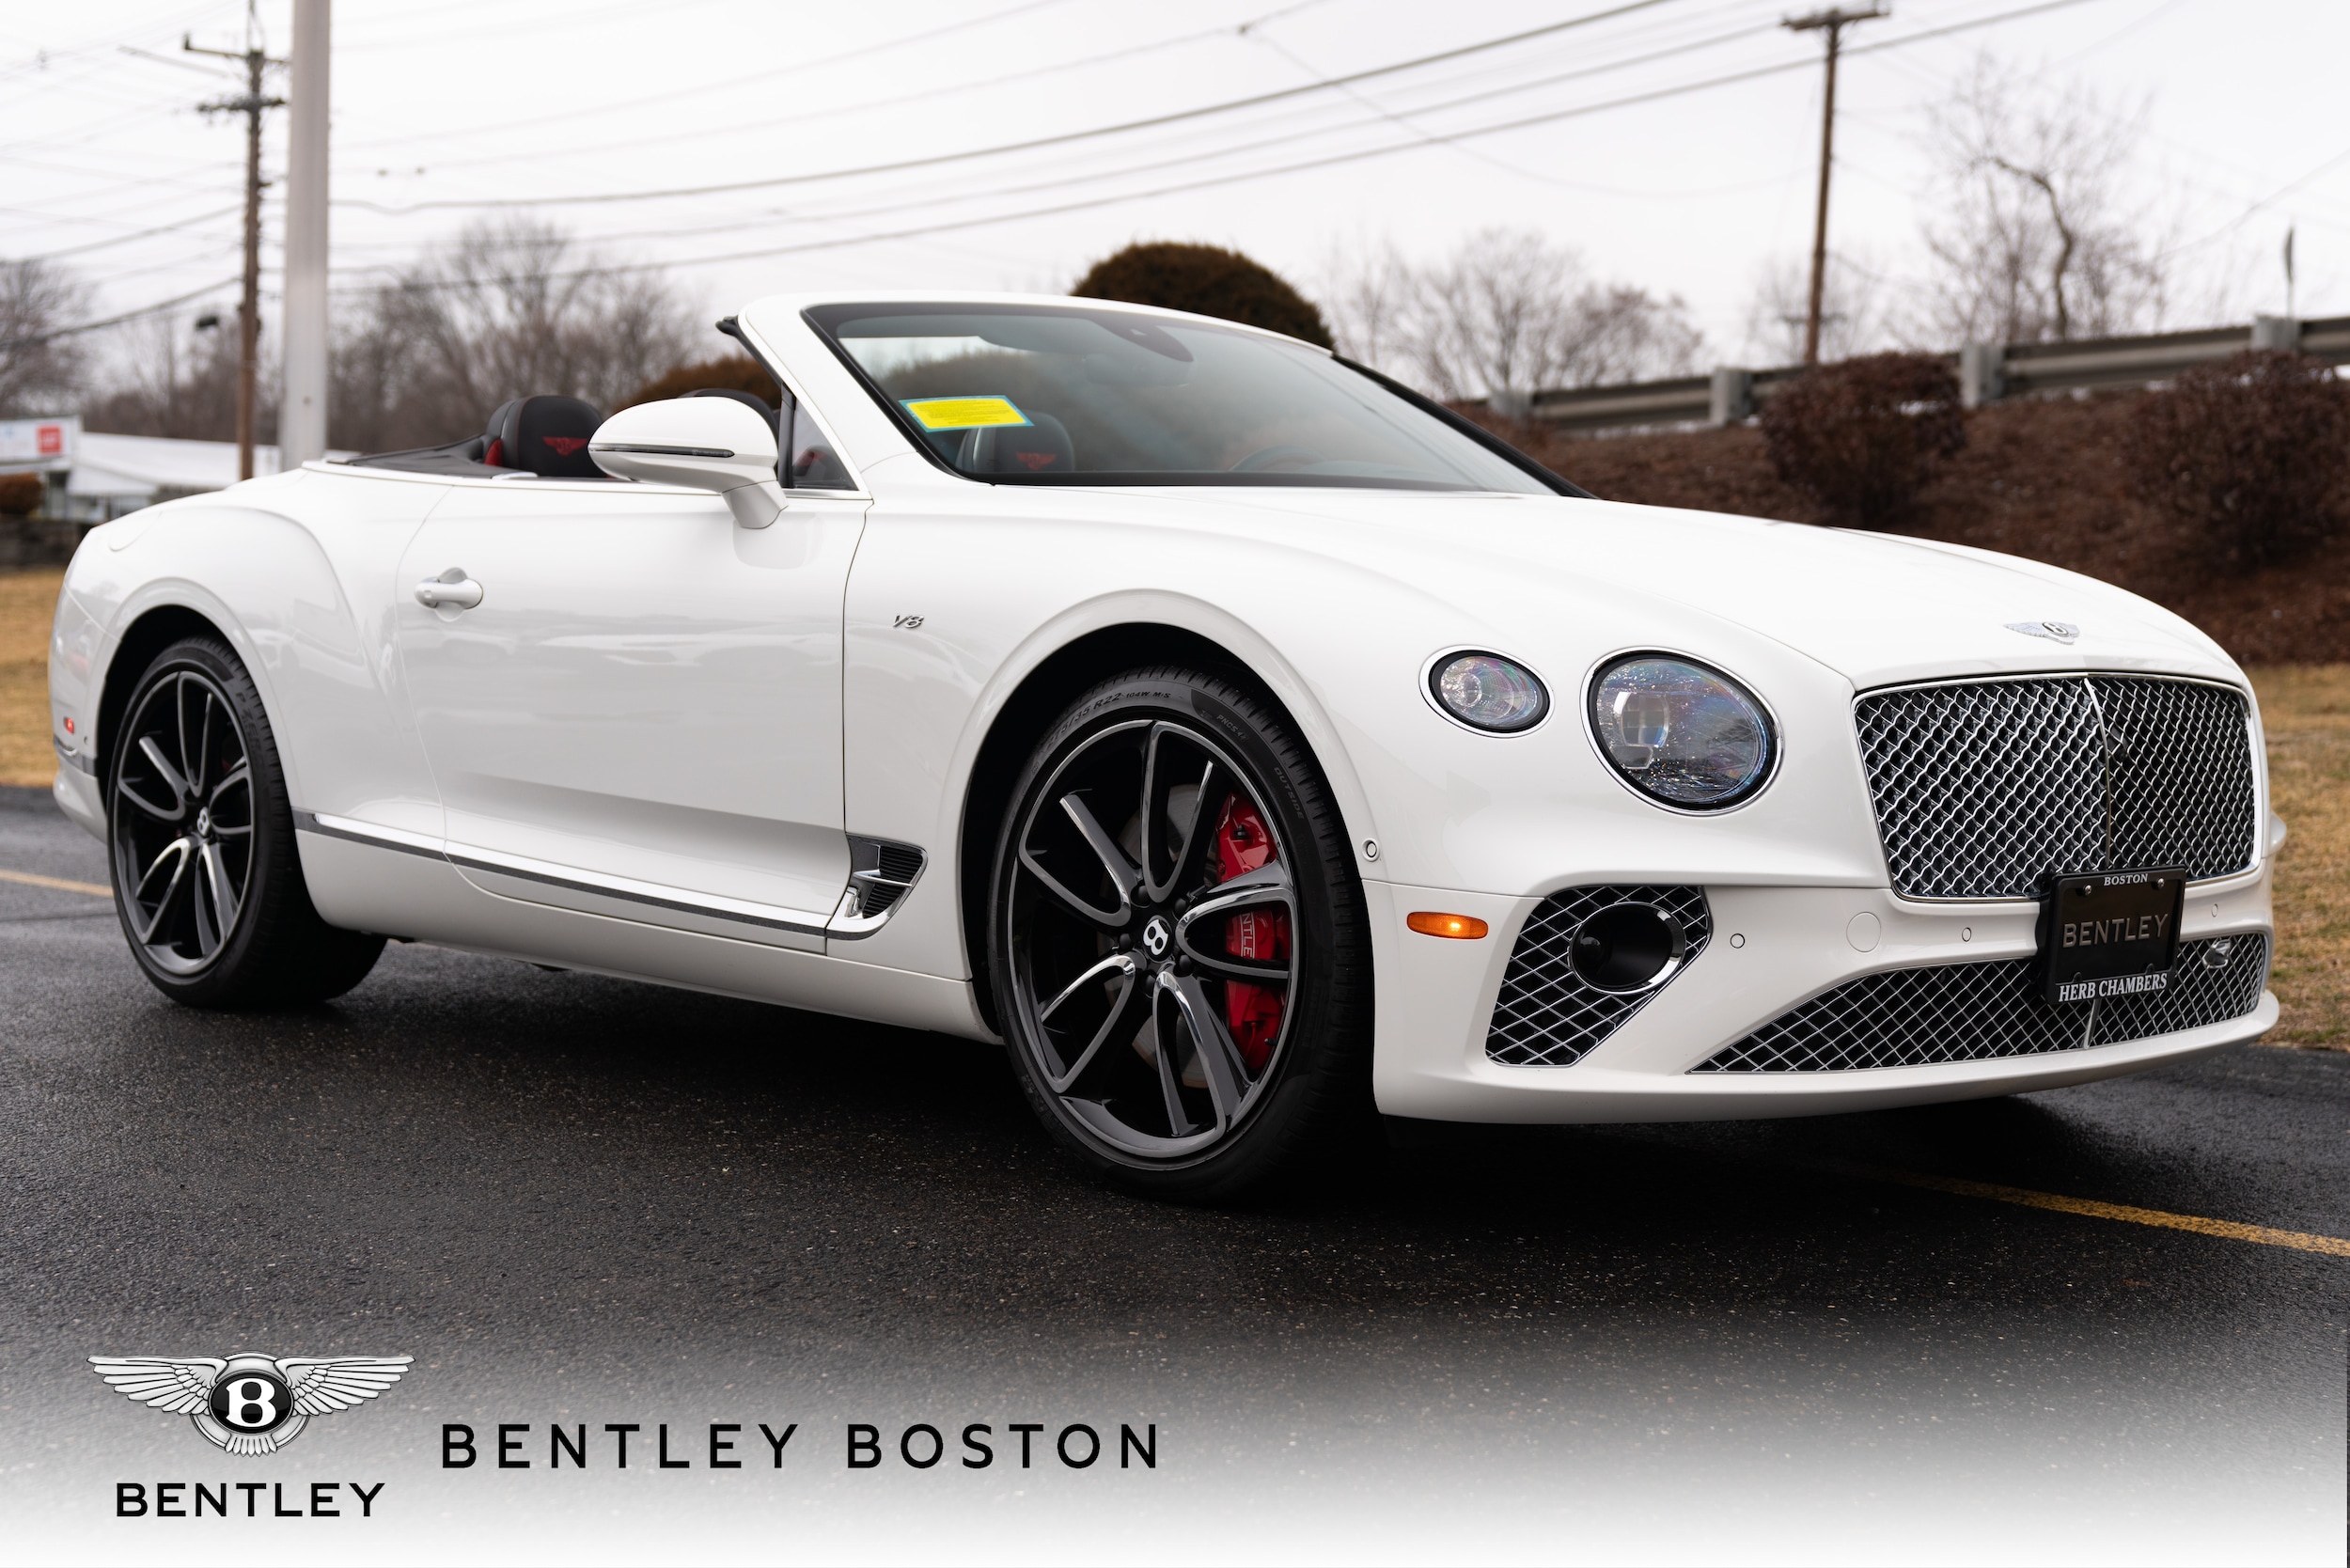 Certified Pre-Owned Bentley For Sale In Boston MA